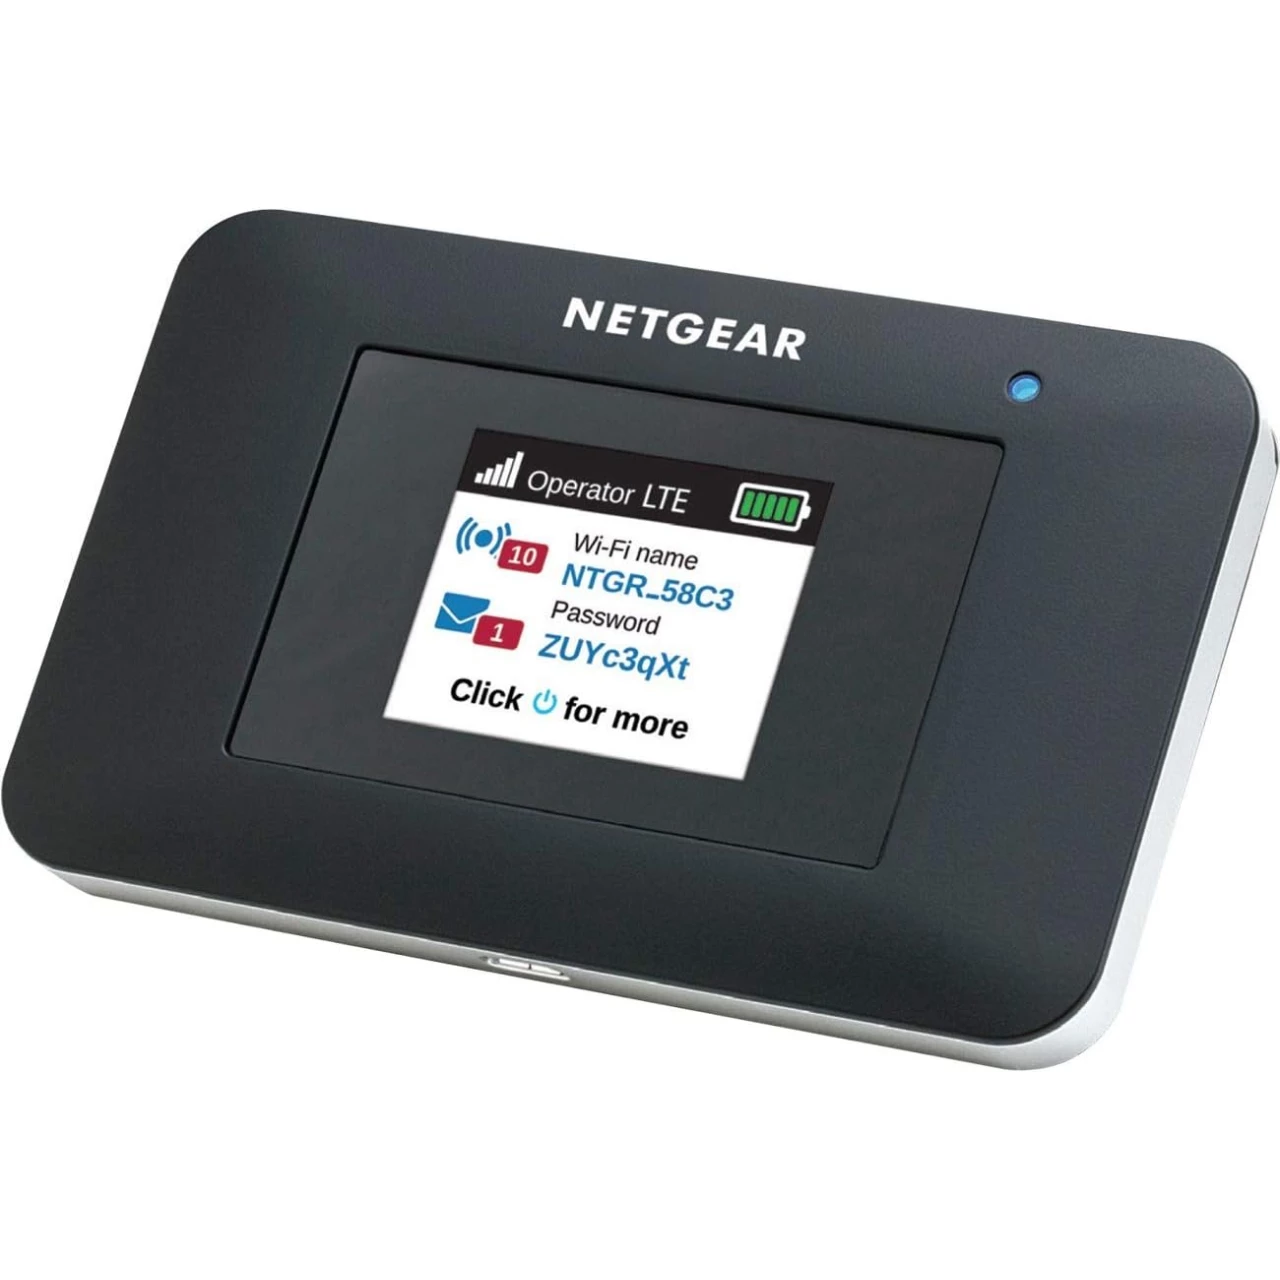 NETGEAR Mobile Wi-Fi Hotspot, 4G LTE Router AC797-100NAS, 400Mbps Download Speed, Connect Up to 15 Devices, Create a WLAN Anywhere, GSM Unlocked